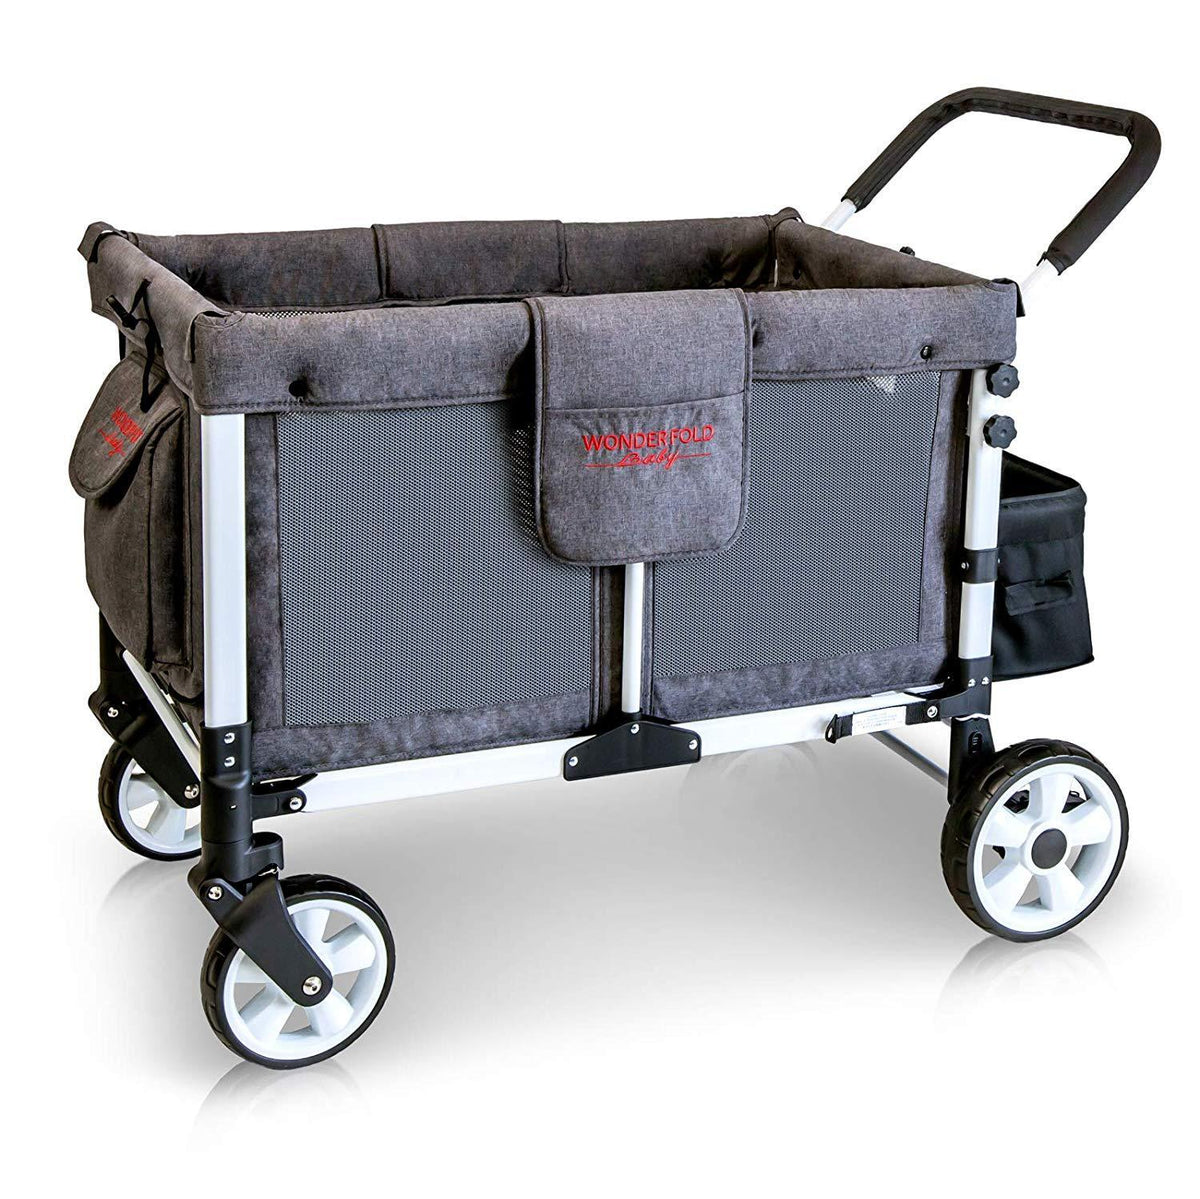 WonderFold Baby Multi-Function Folding Quad Stroller Wagon with Removable Canopy and Seats Gray Used